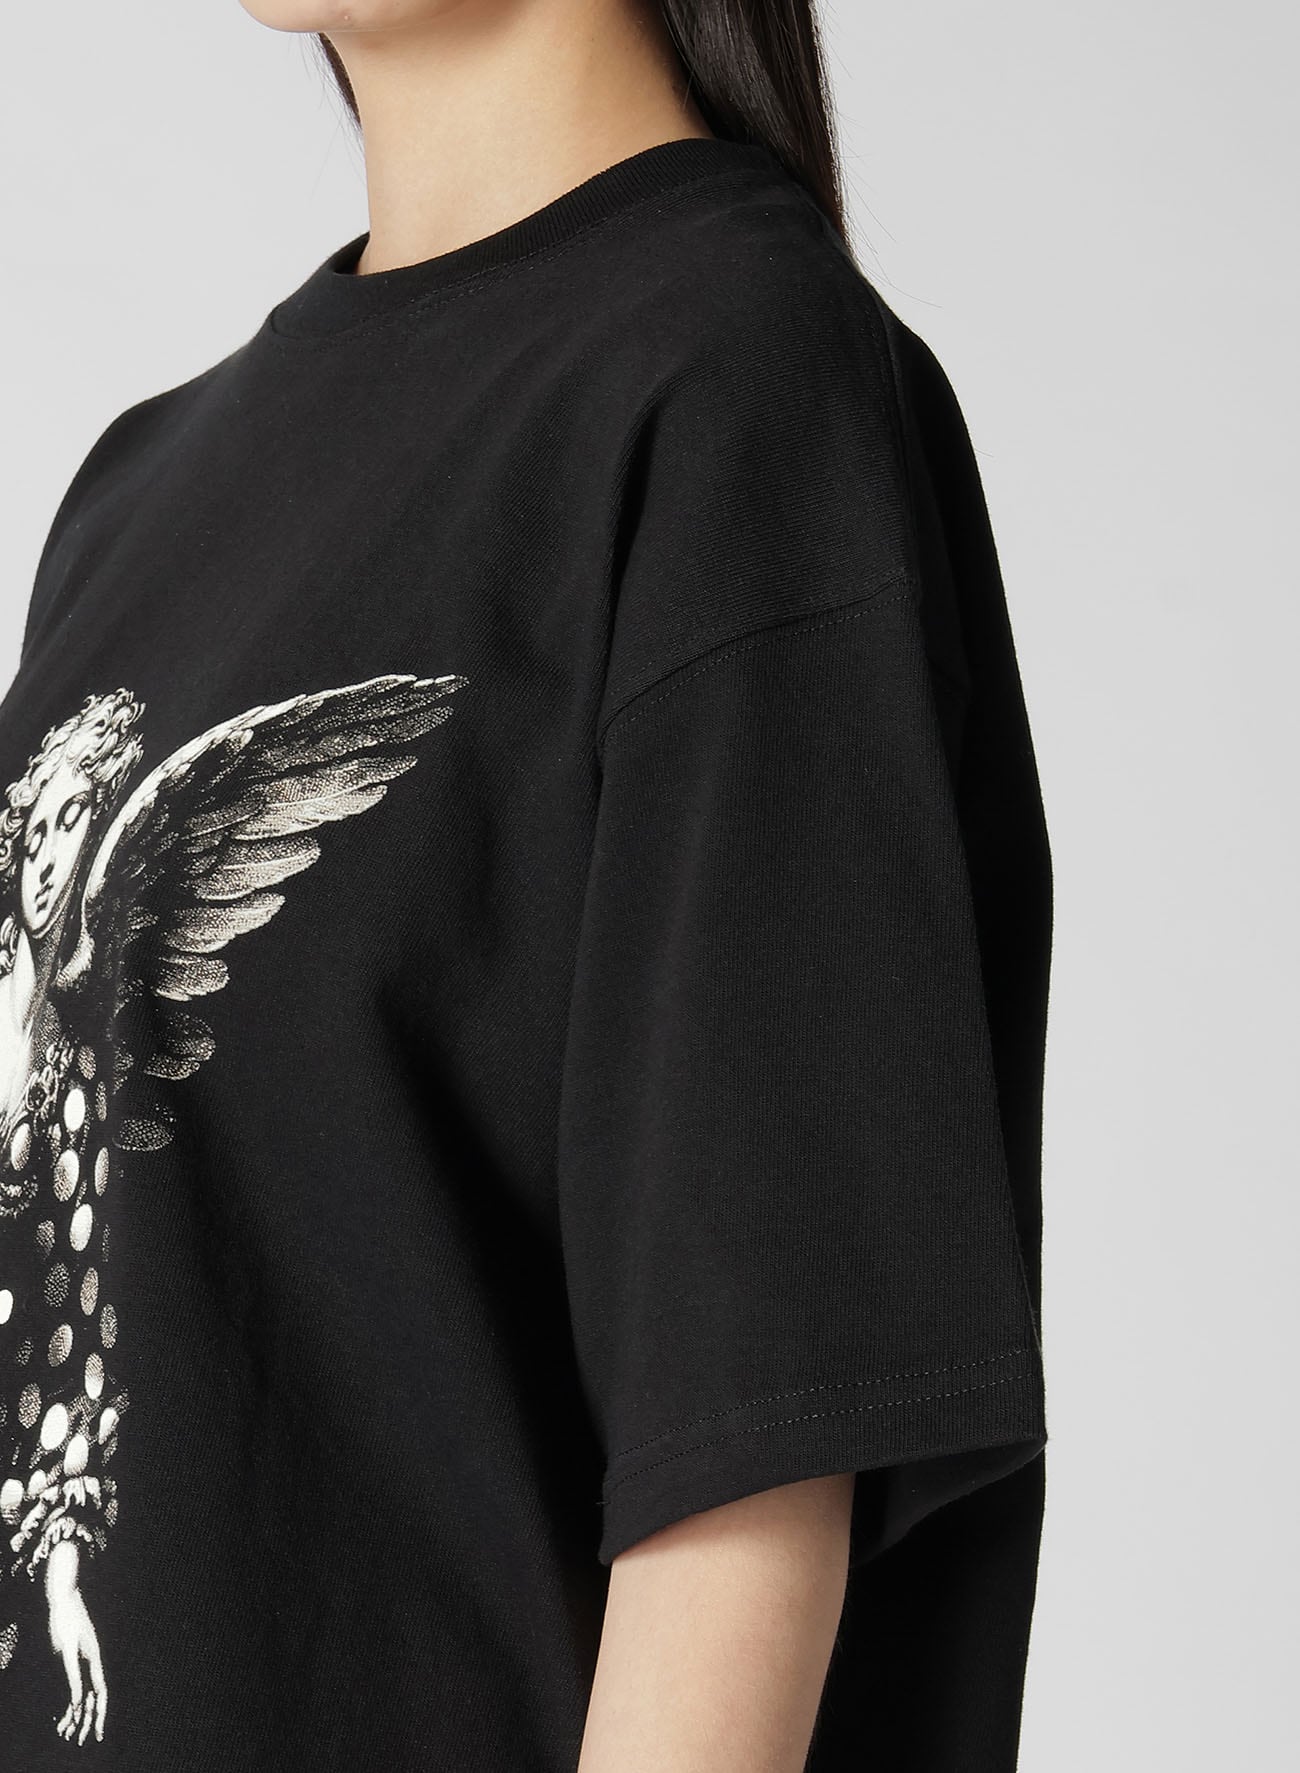 【7/17 12:00(JST) Release】ANGEL PRINTED T-SHIRT B